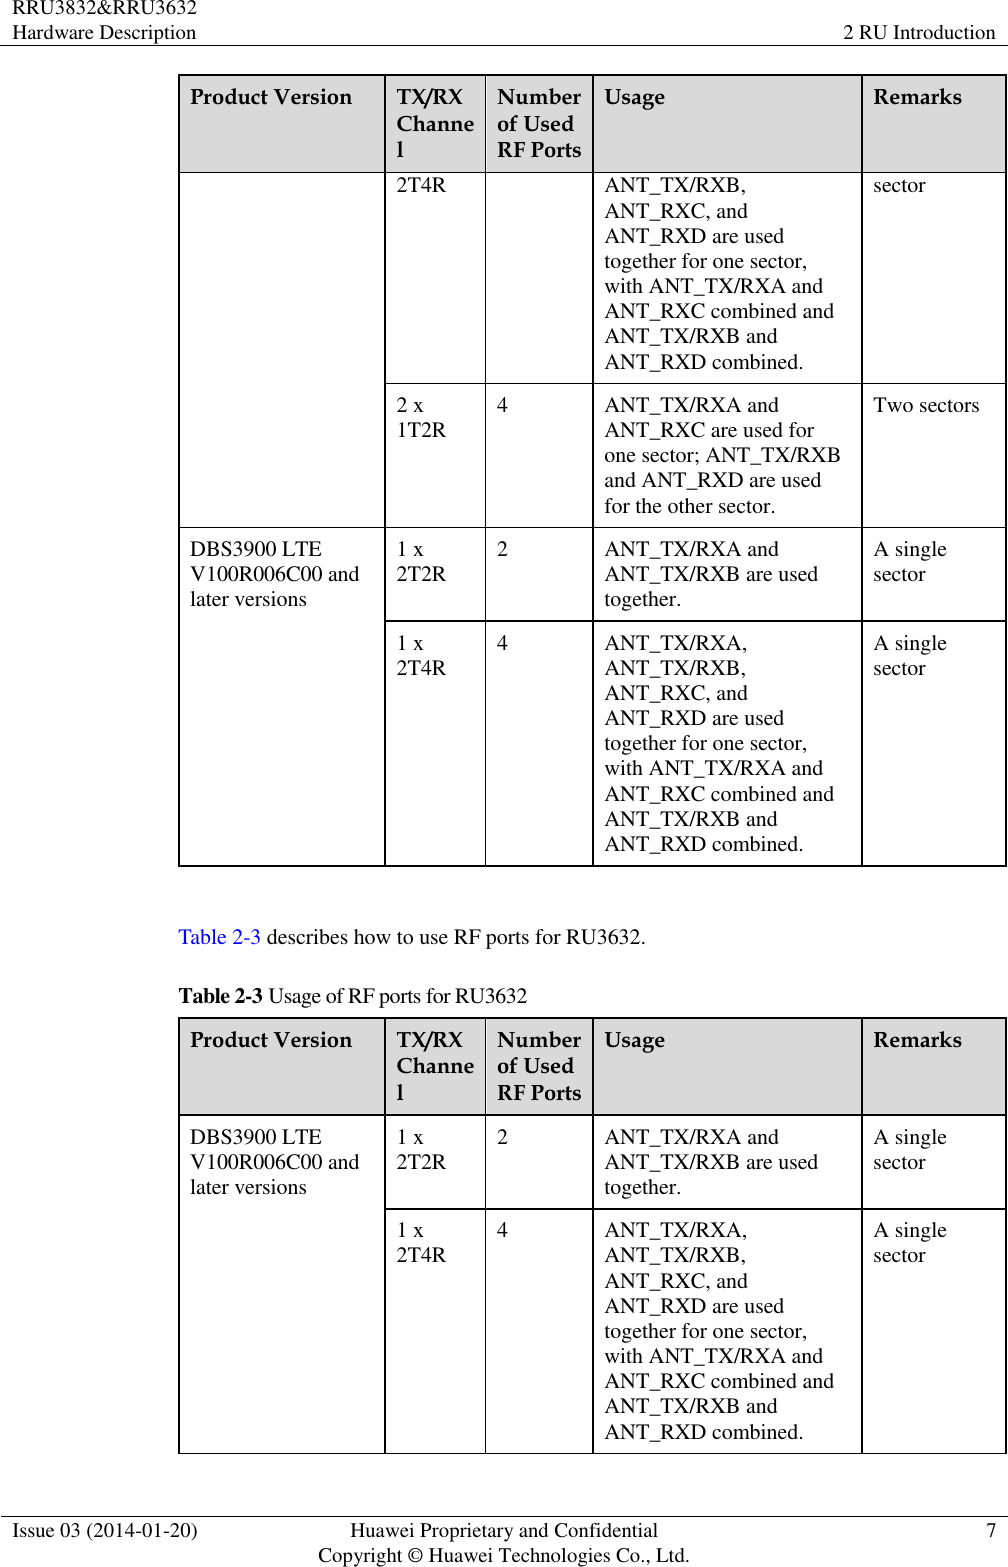 RRU3832&amp;RRU3632 Hardware Description 2 RU Introduction  Issue 03 (2014-01-20) Huawei Proprietary and Confidential                                     Copyright © Huawei Technologies Co., Ltd. 7  Product Version TX/RX Channel Number of Used RF Ports Usage Remarks 2T4R ANT_TX/RXB, ANT_RXC, and ANT_RXD are used together for one sector, with ANT_TX/RXA and ANT_RXC combined and ANT_TX/RXB and ANT_RXD combined. sector 2 x 1T2R 4 ANT_TX/RXA and ANT_RXC are used for one sector; ANT_TX/RXB and ANT_RXD are used for the other sector. Two sectors DBS3900 LTE V100R006C00 and later versions 1 x 2T2R 2 ANT_TX/RXA and ANT_TX/RXB are used together. A single sector 1 x 2T4R 4 ANT_TX/RXA, ANT_TX/RXB, ANT_RXC, and ANT_RXD are used together for one sector, with ANT_TX/RXA and ANT_RXC combined and ANT_TX/RXB and ANT_RXD combined. A single sector  Table 2-3 describes how to use RF ports for RU3632. Table 2-3 Usage of RF ports for RU3632 Product Version TX/RX Channel Number of Used RF Ports Usage Remarks DBS3900 LTE V100R006C00 and later versions 1 x 2T2R 2 ANT_TX/RXA and ANT_TX/RXB are used together. A single sector 1 x 2T4R 4 ANT_TX/RXA, ANT_TX/RXB, ANT_RXC, and ANT_RXD are used together for one sector, with ANT_TX/RXA and ANT_RXC combined and ANT_TX/RXB and ANT_RXD combined. A single sector 